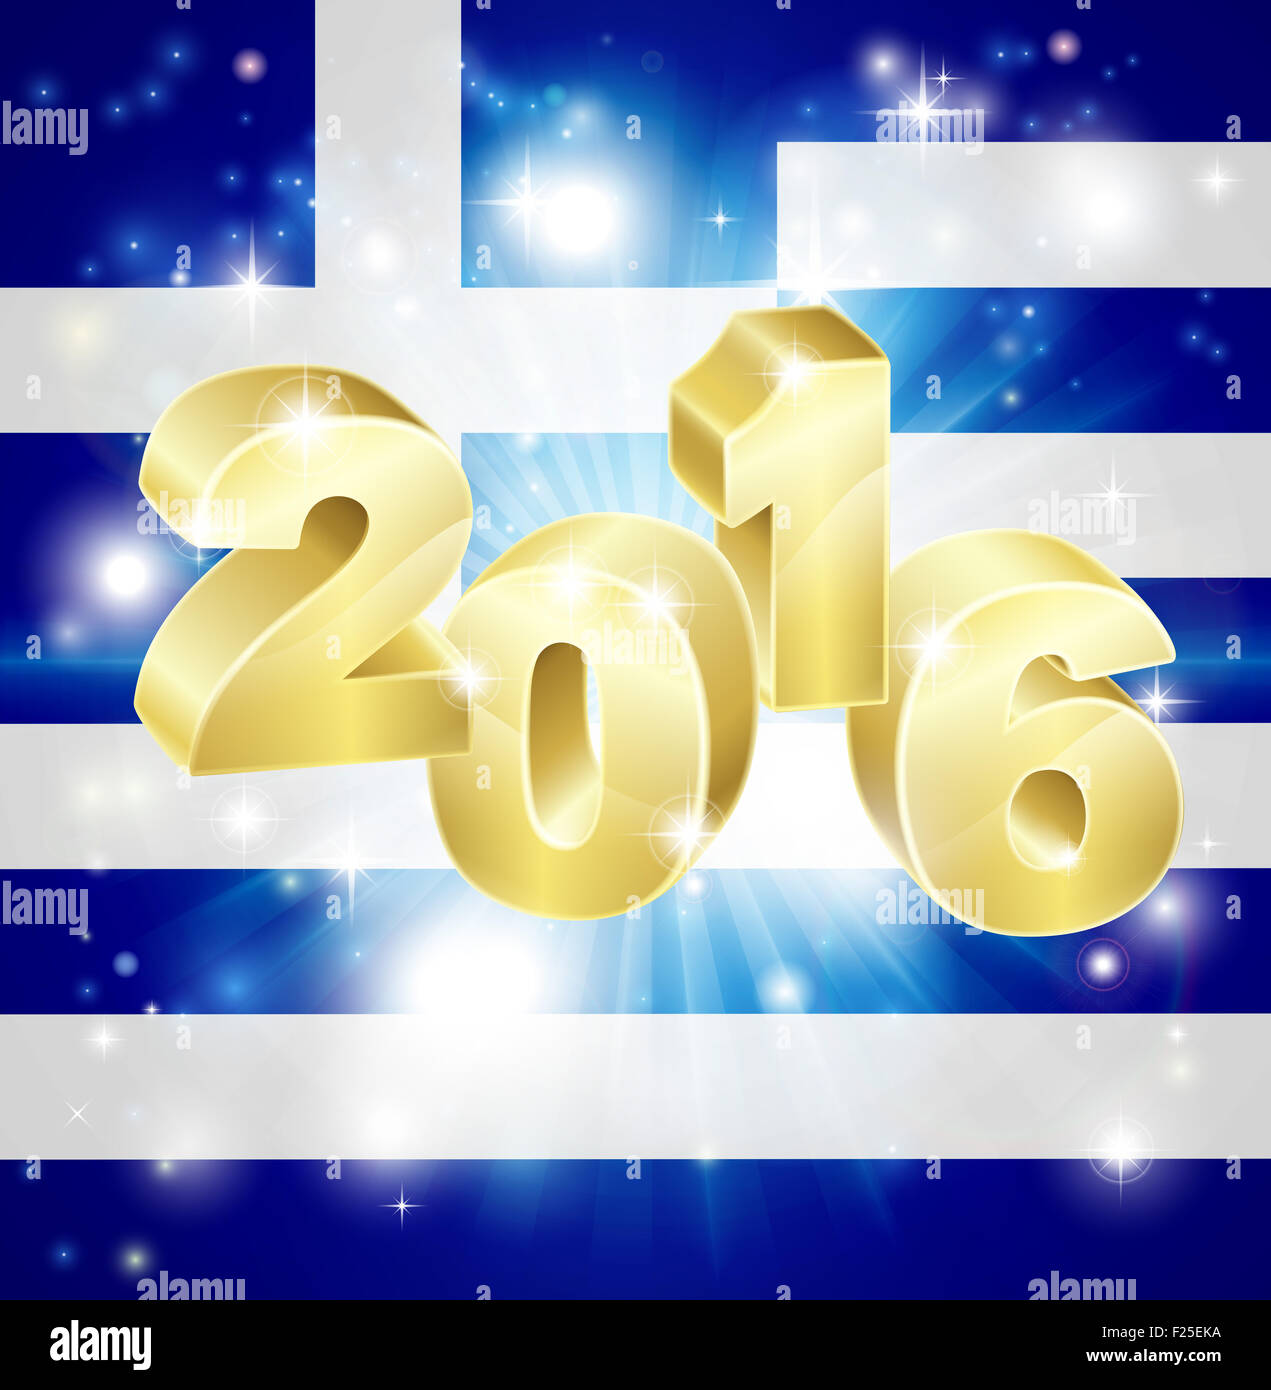 A Greek flag with 2016 coming out of it with fireworks. Concept for New Year or anything exciting happening in Greece in the yea Stock Photo